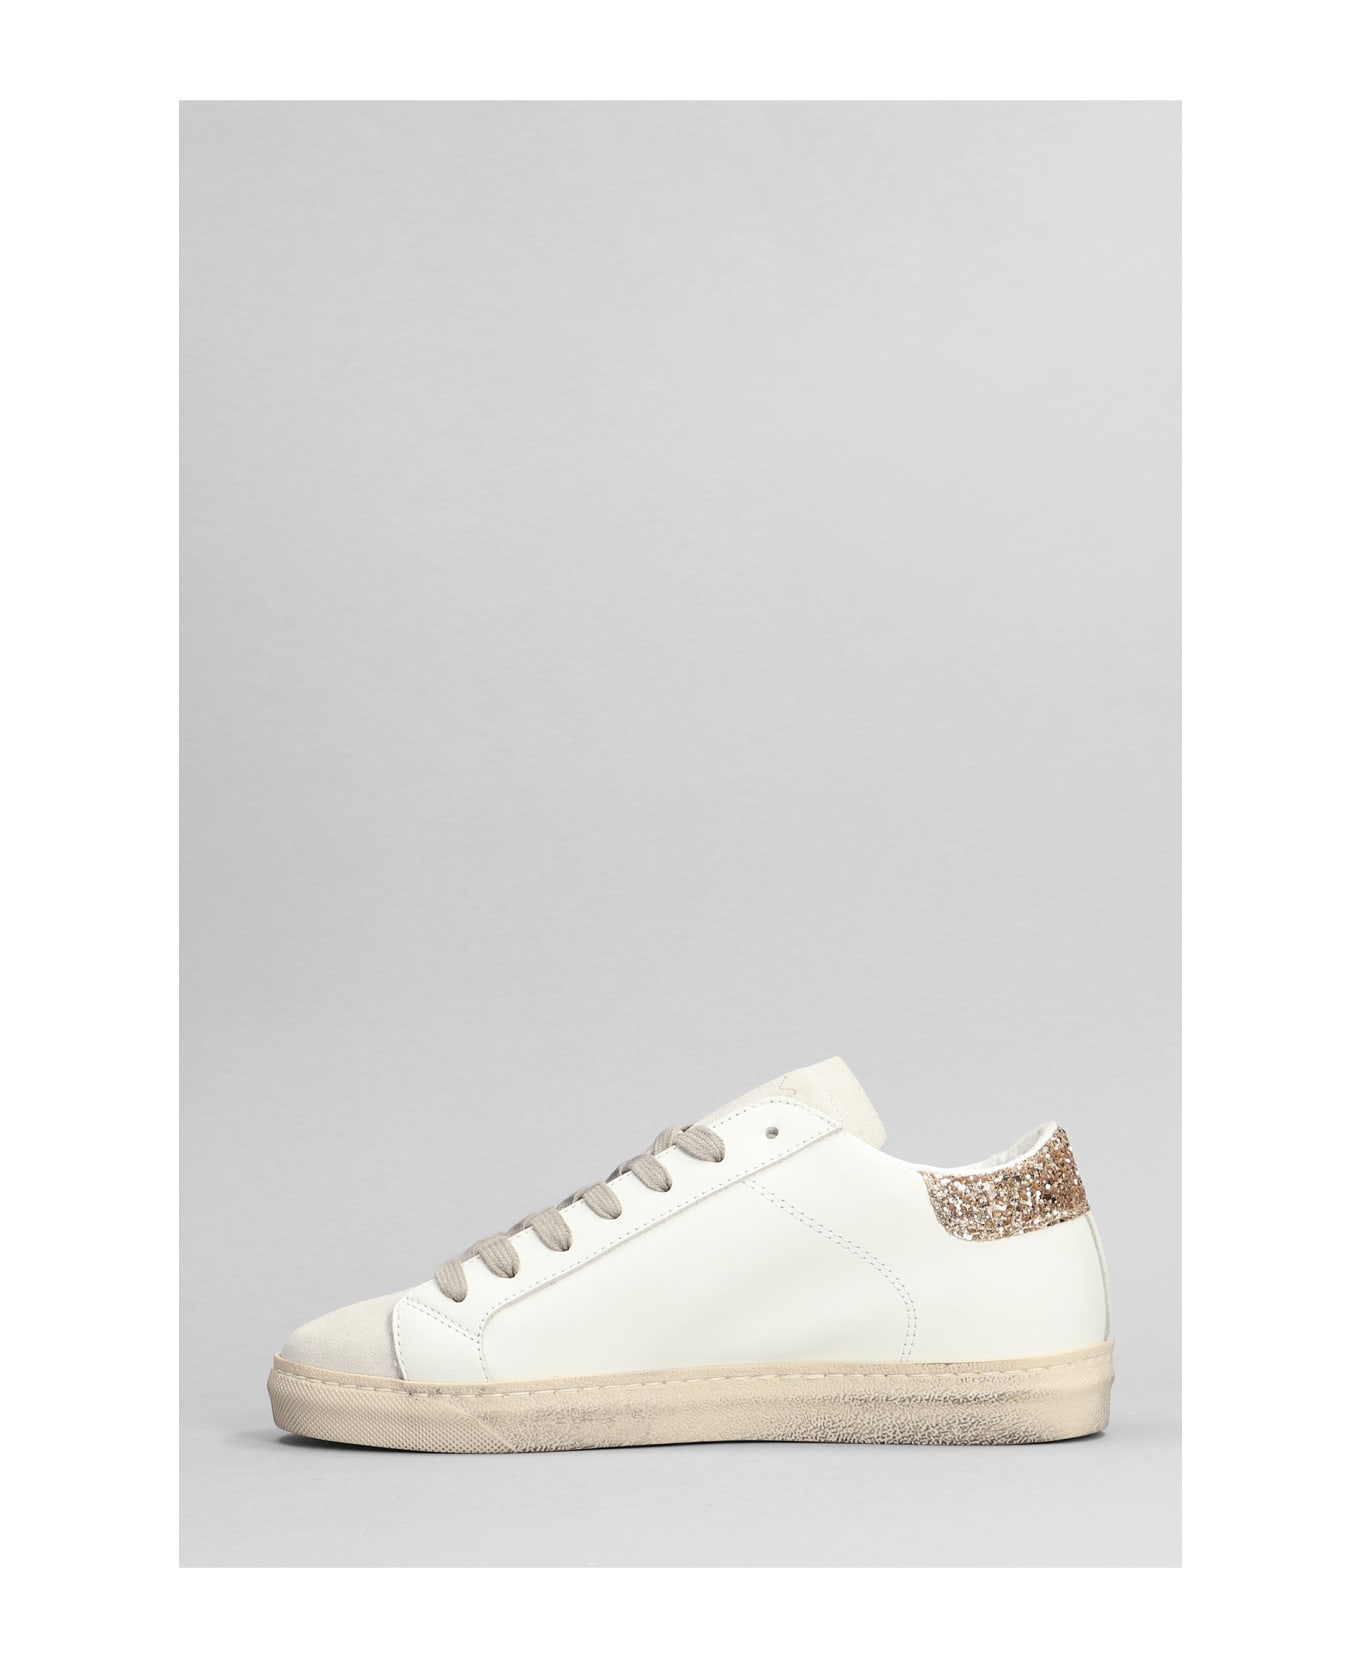 AMA-BRAND Sneakers In White Suede And Leather - white スニーカー